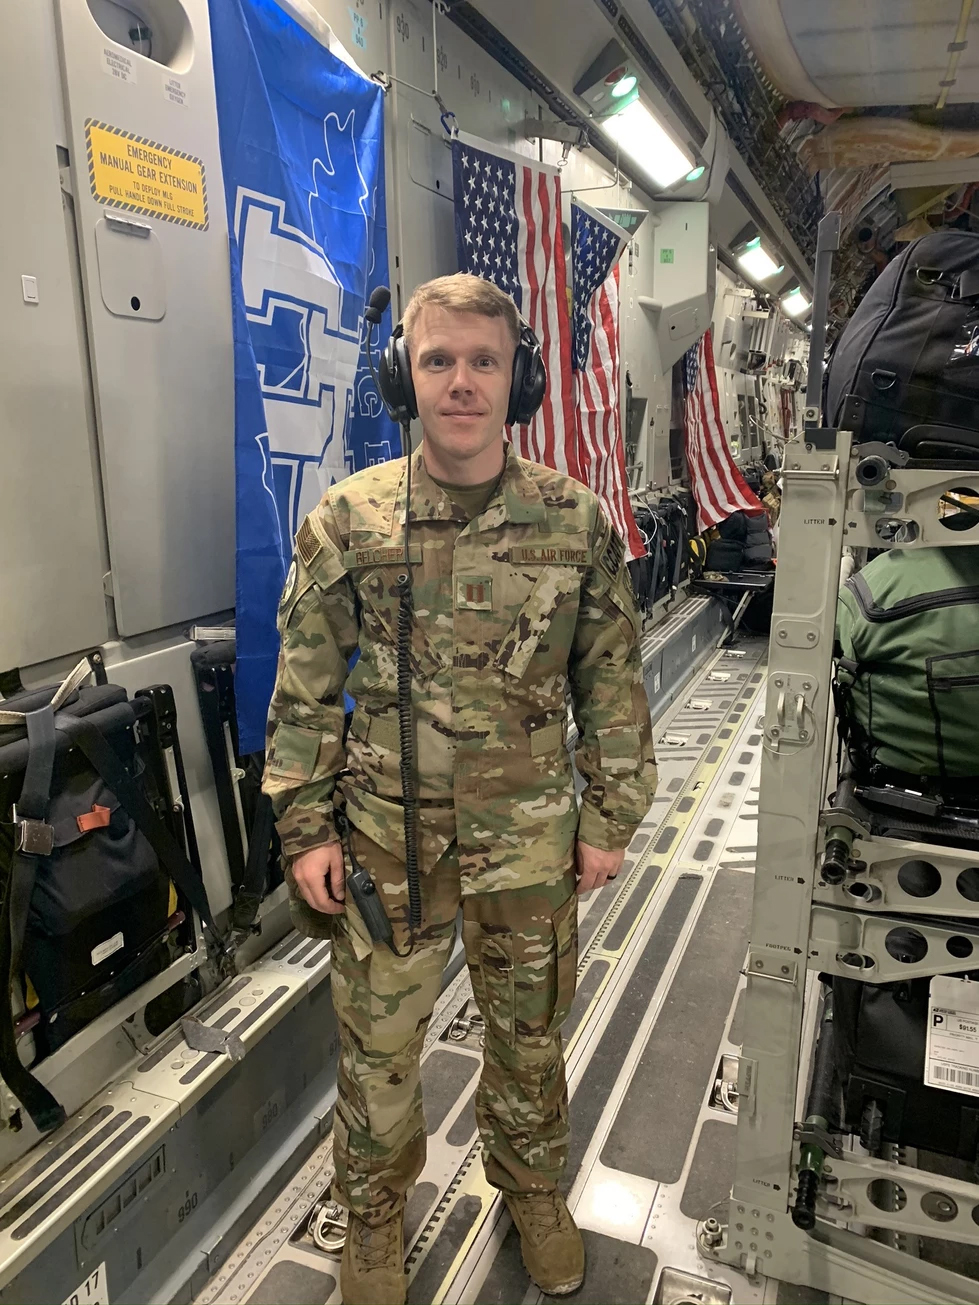 USAF Major, Dr. Chris Belcher on a C-17 deck in military uniform with USA and UK flags in background